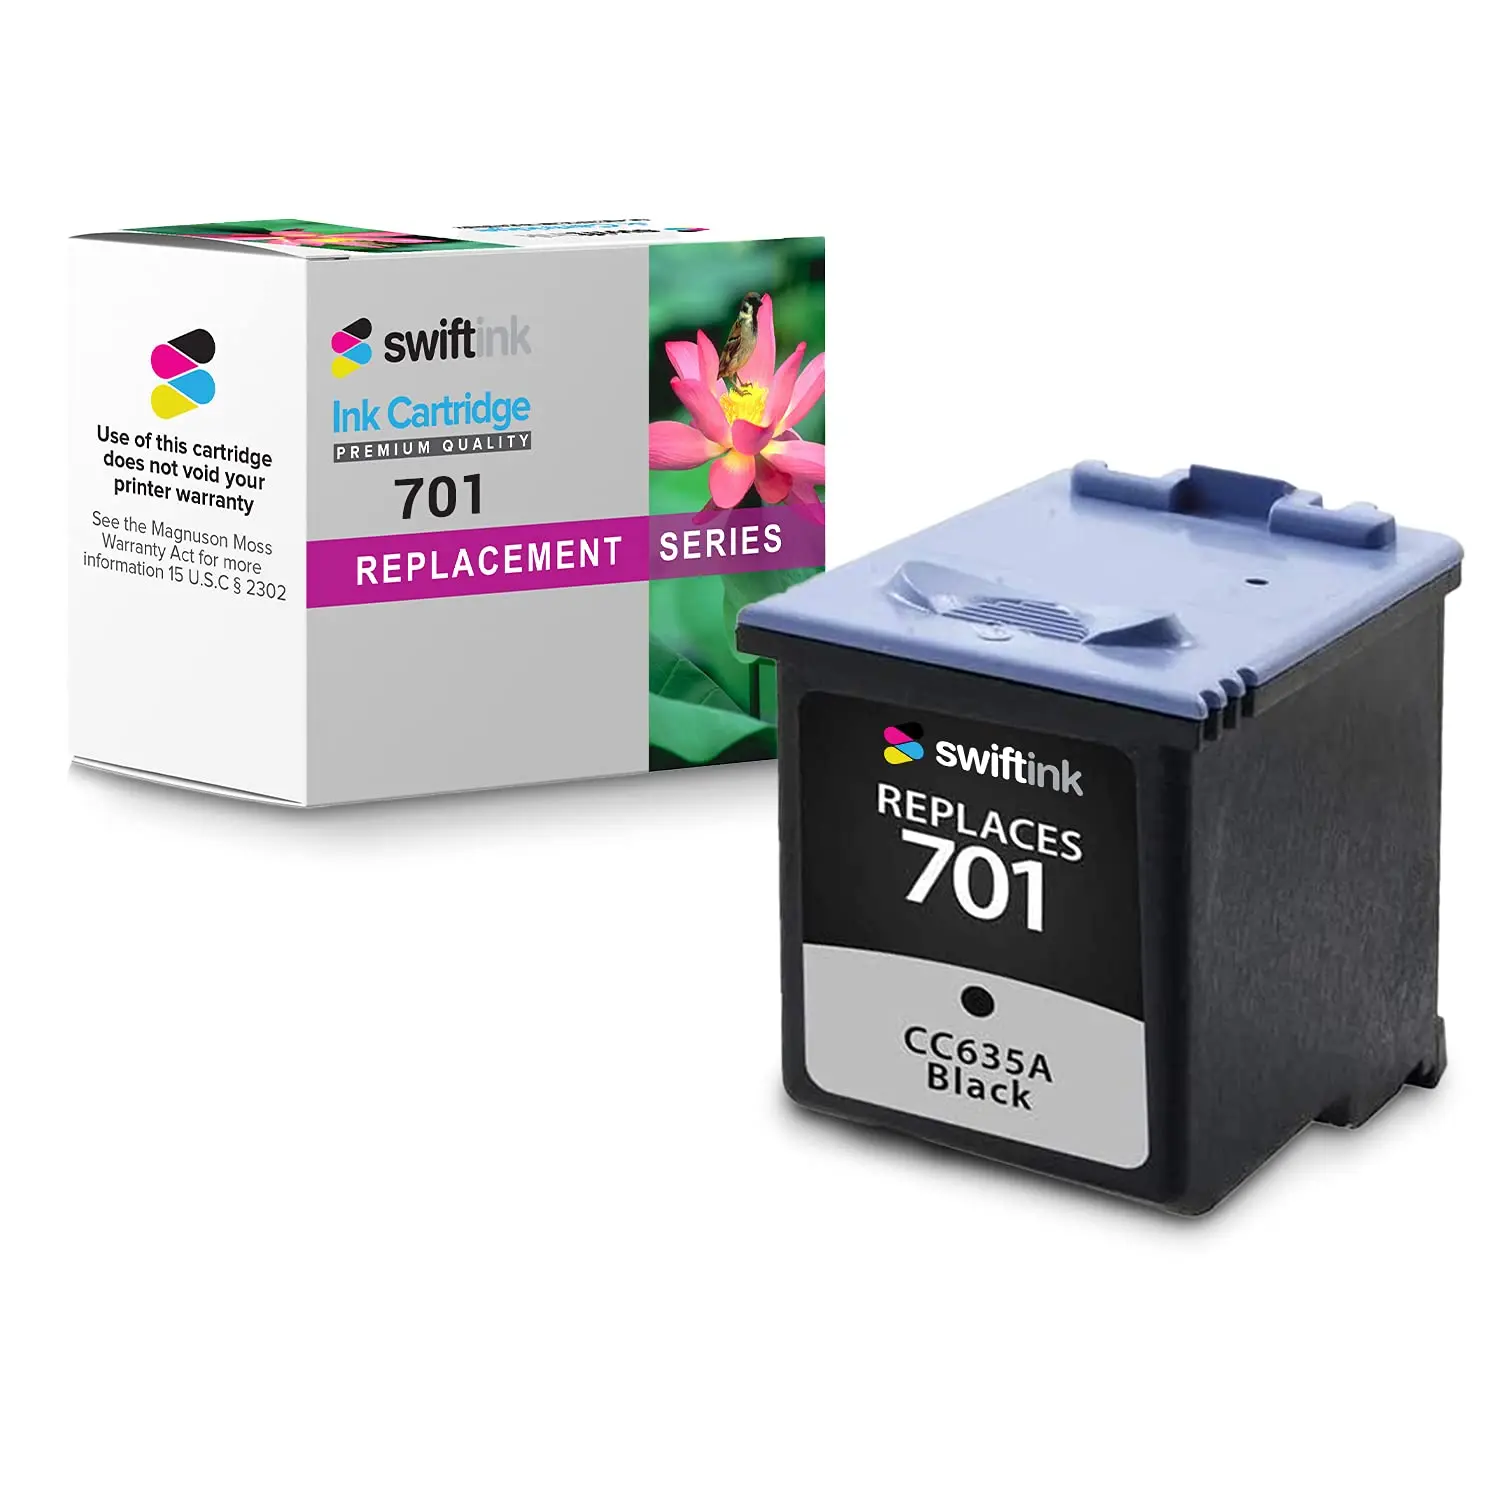 Hewlett packard replacement ink cartridges: a complete guide